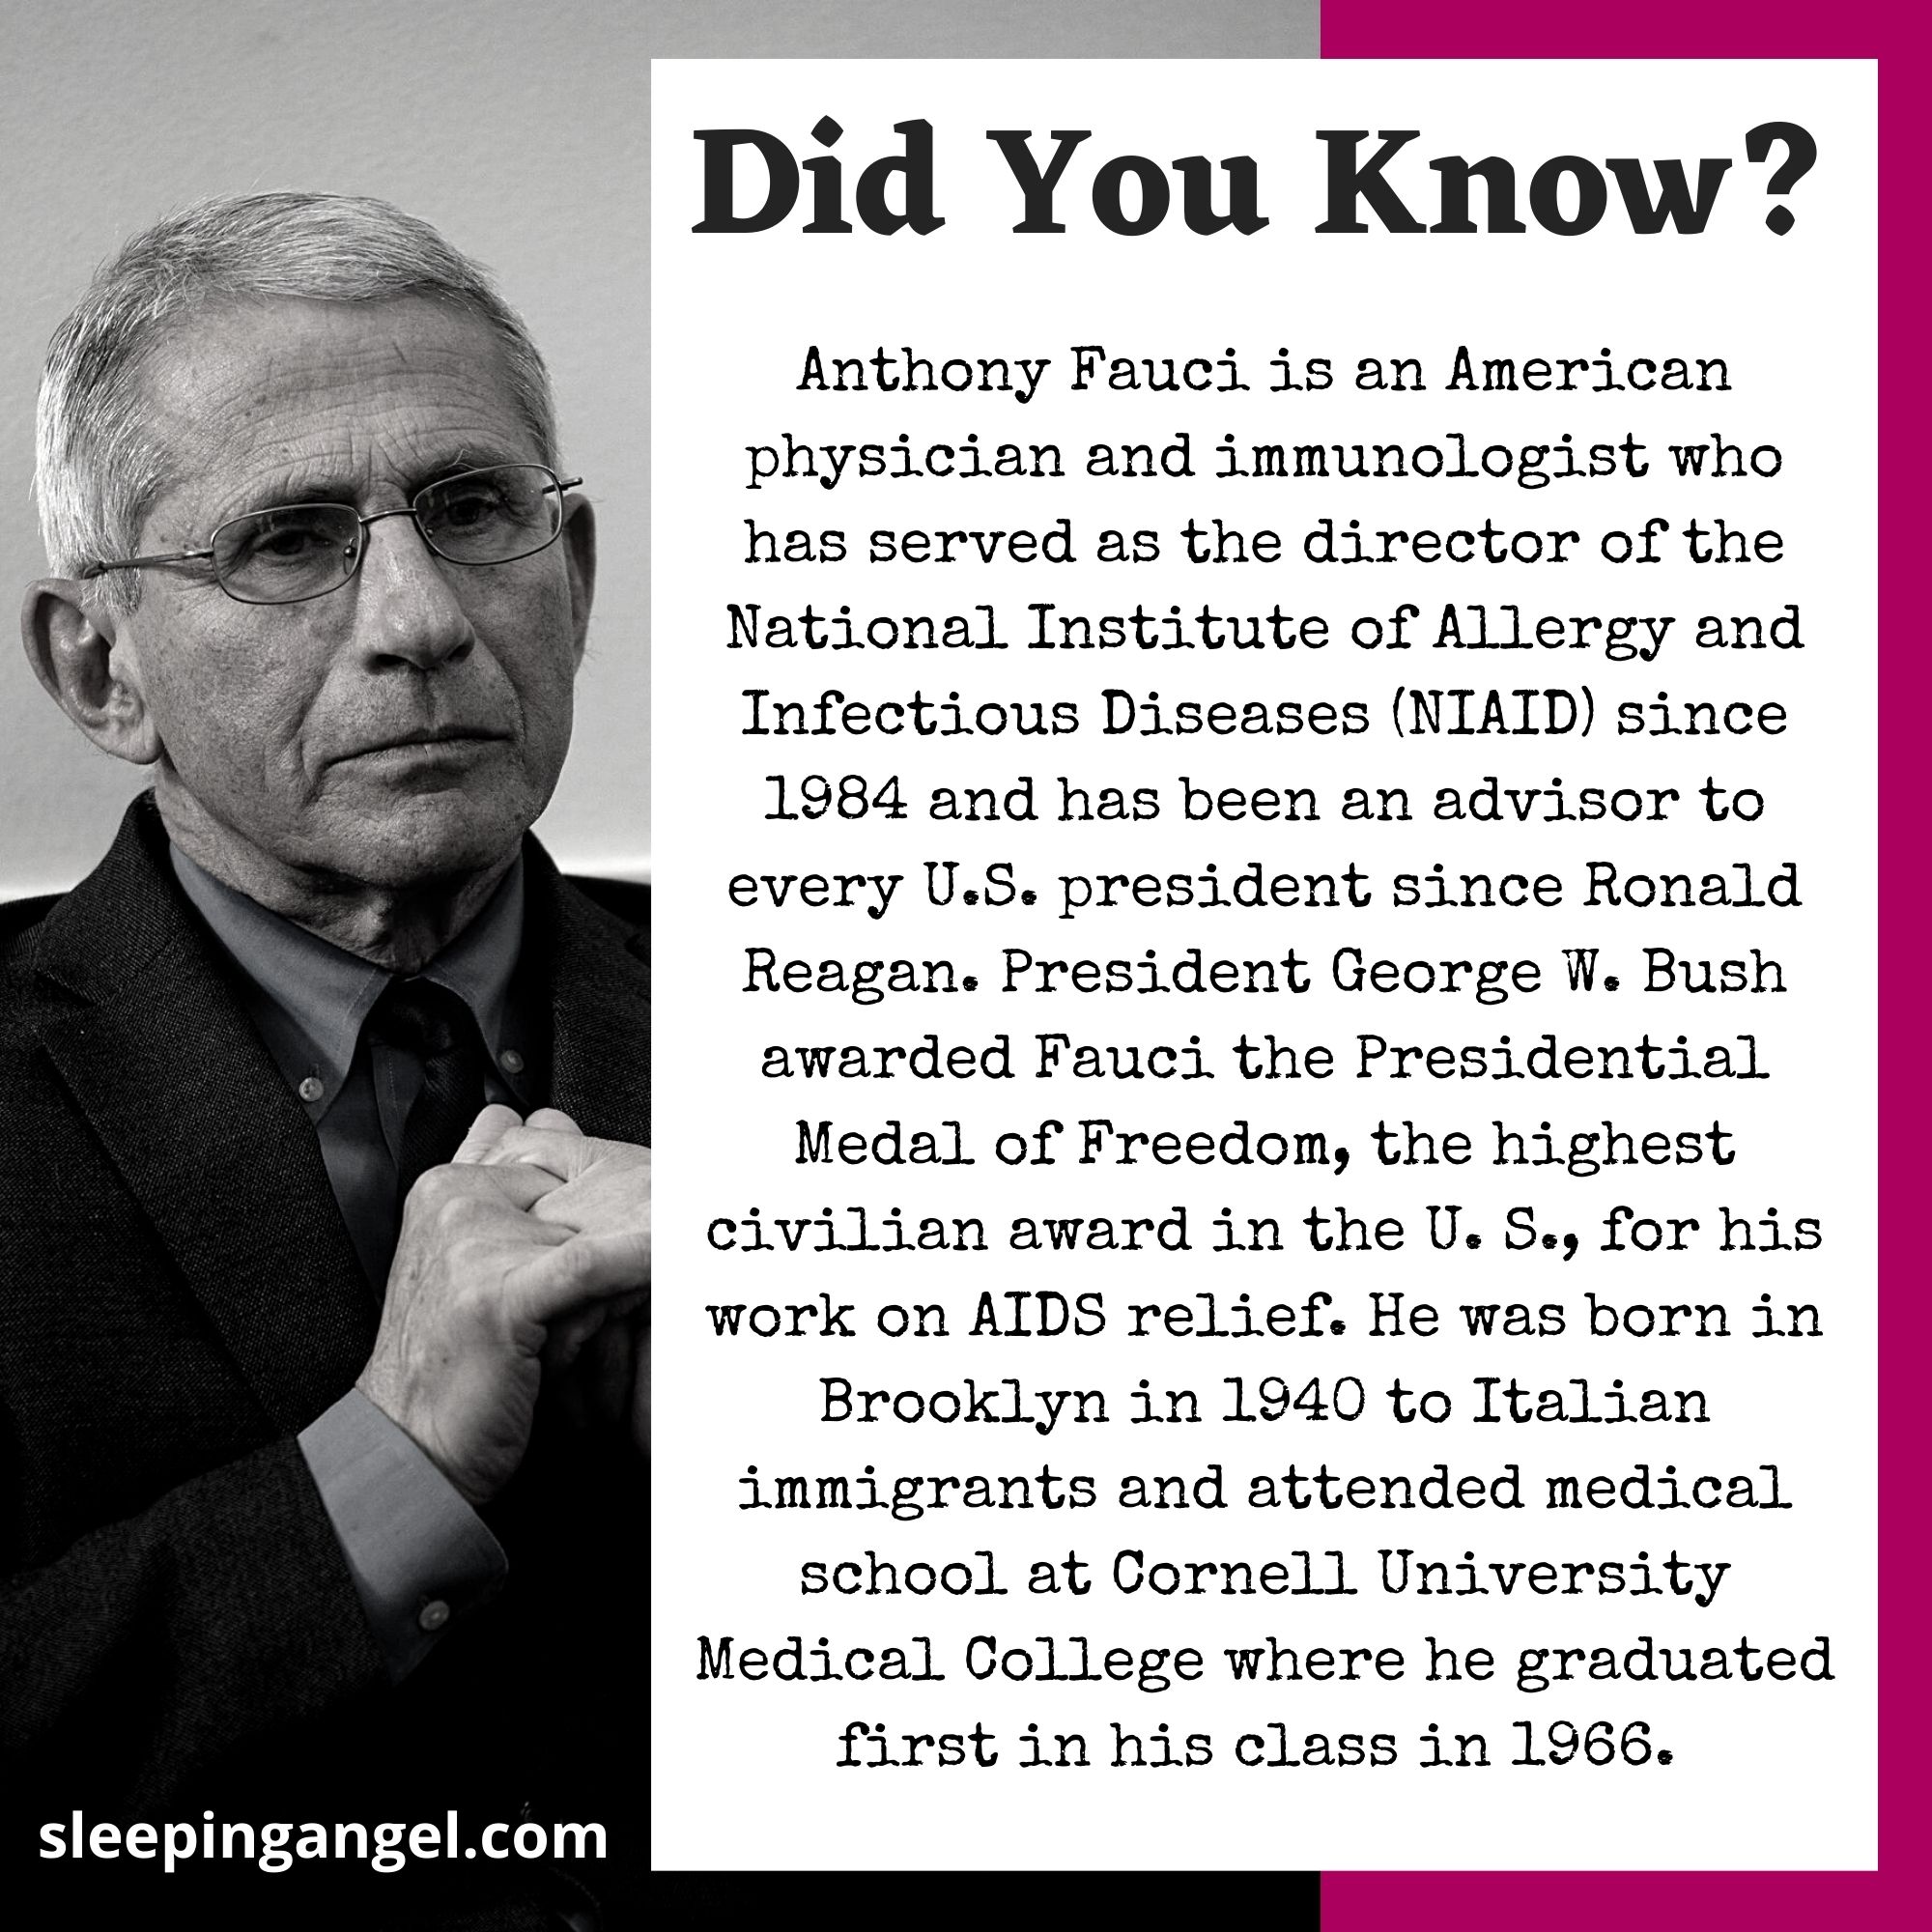 Did You Know? Dr. Fauci